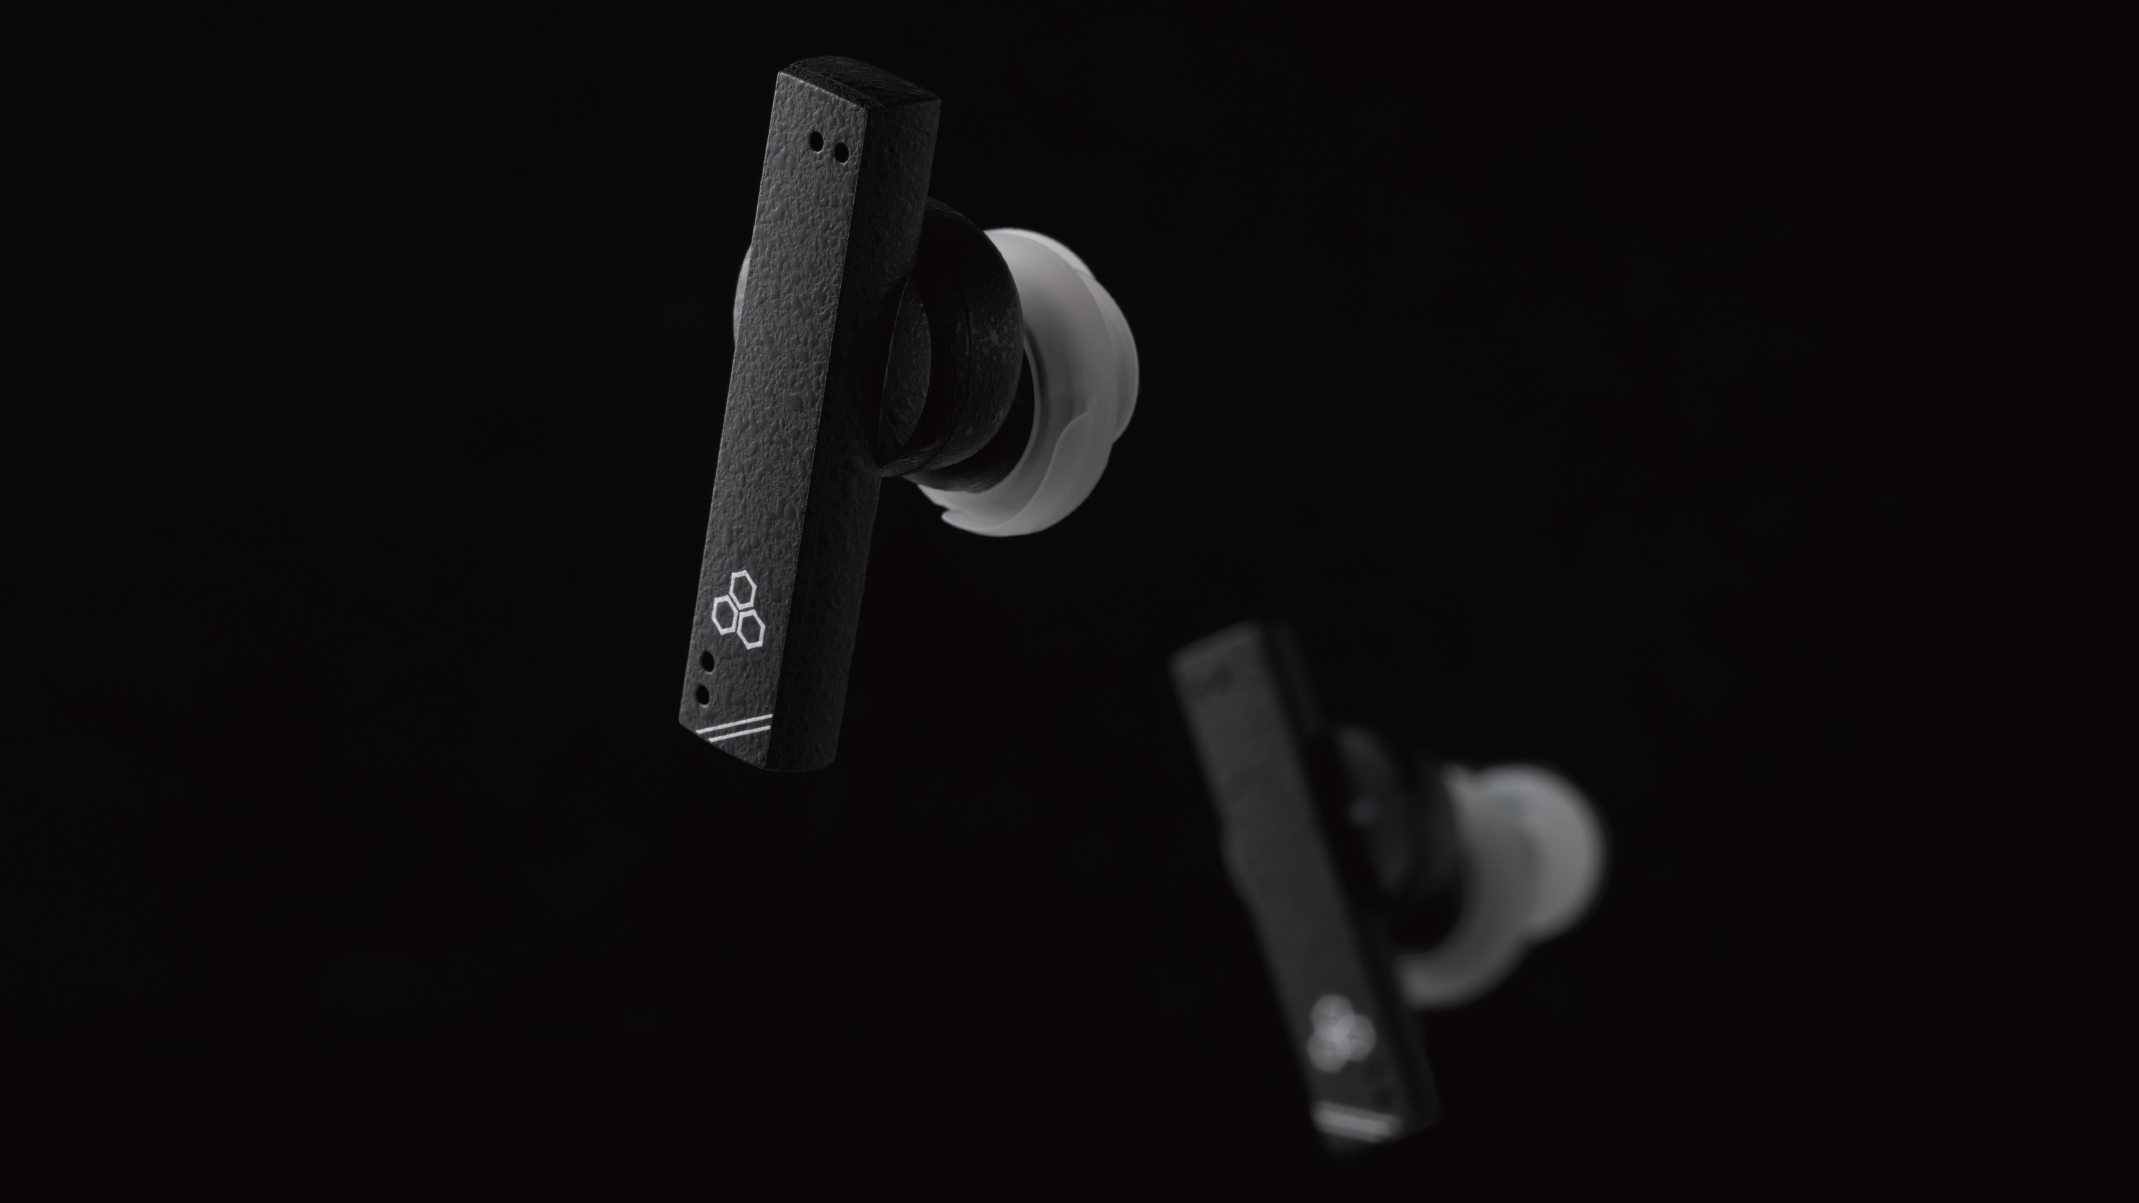 The Final ZE8000 MK2 wireless earbuds floating on a black background